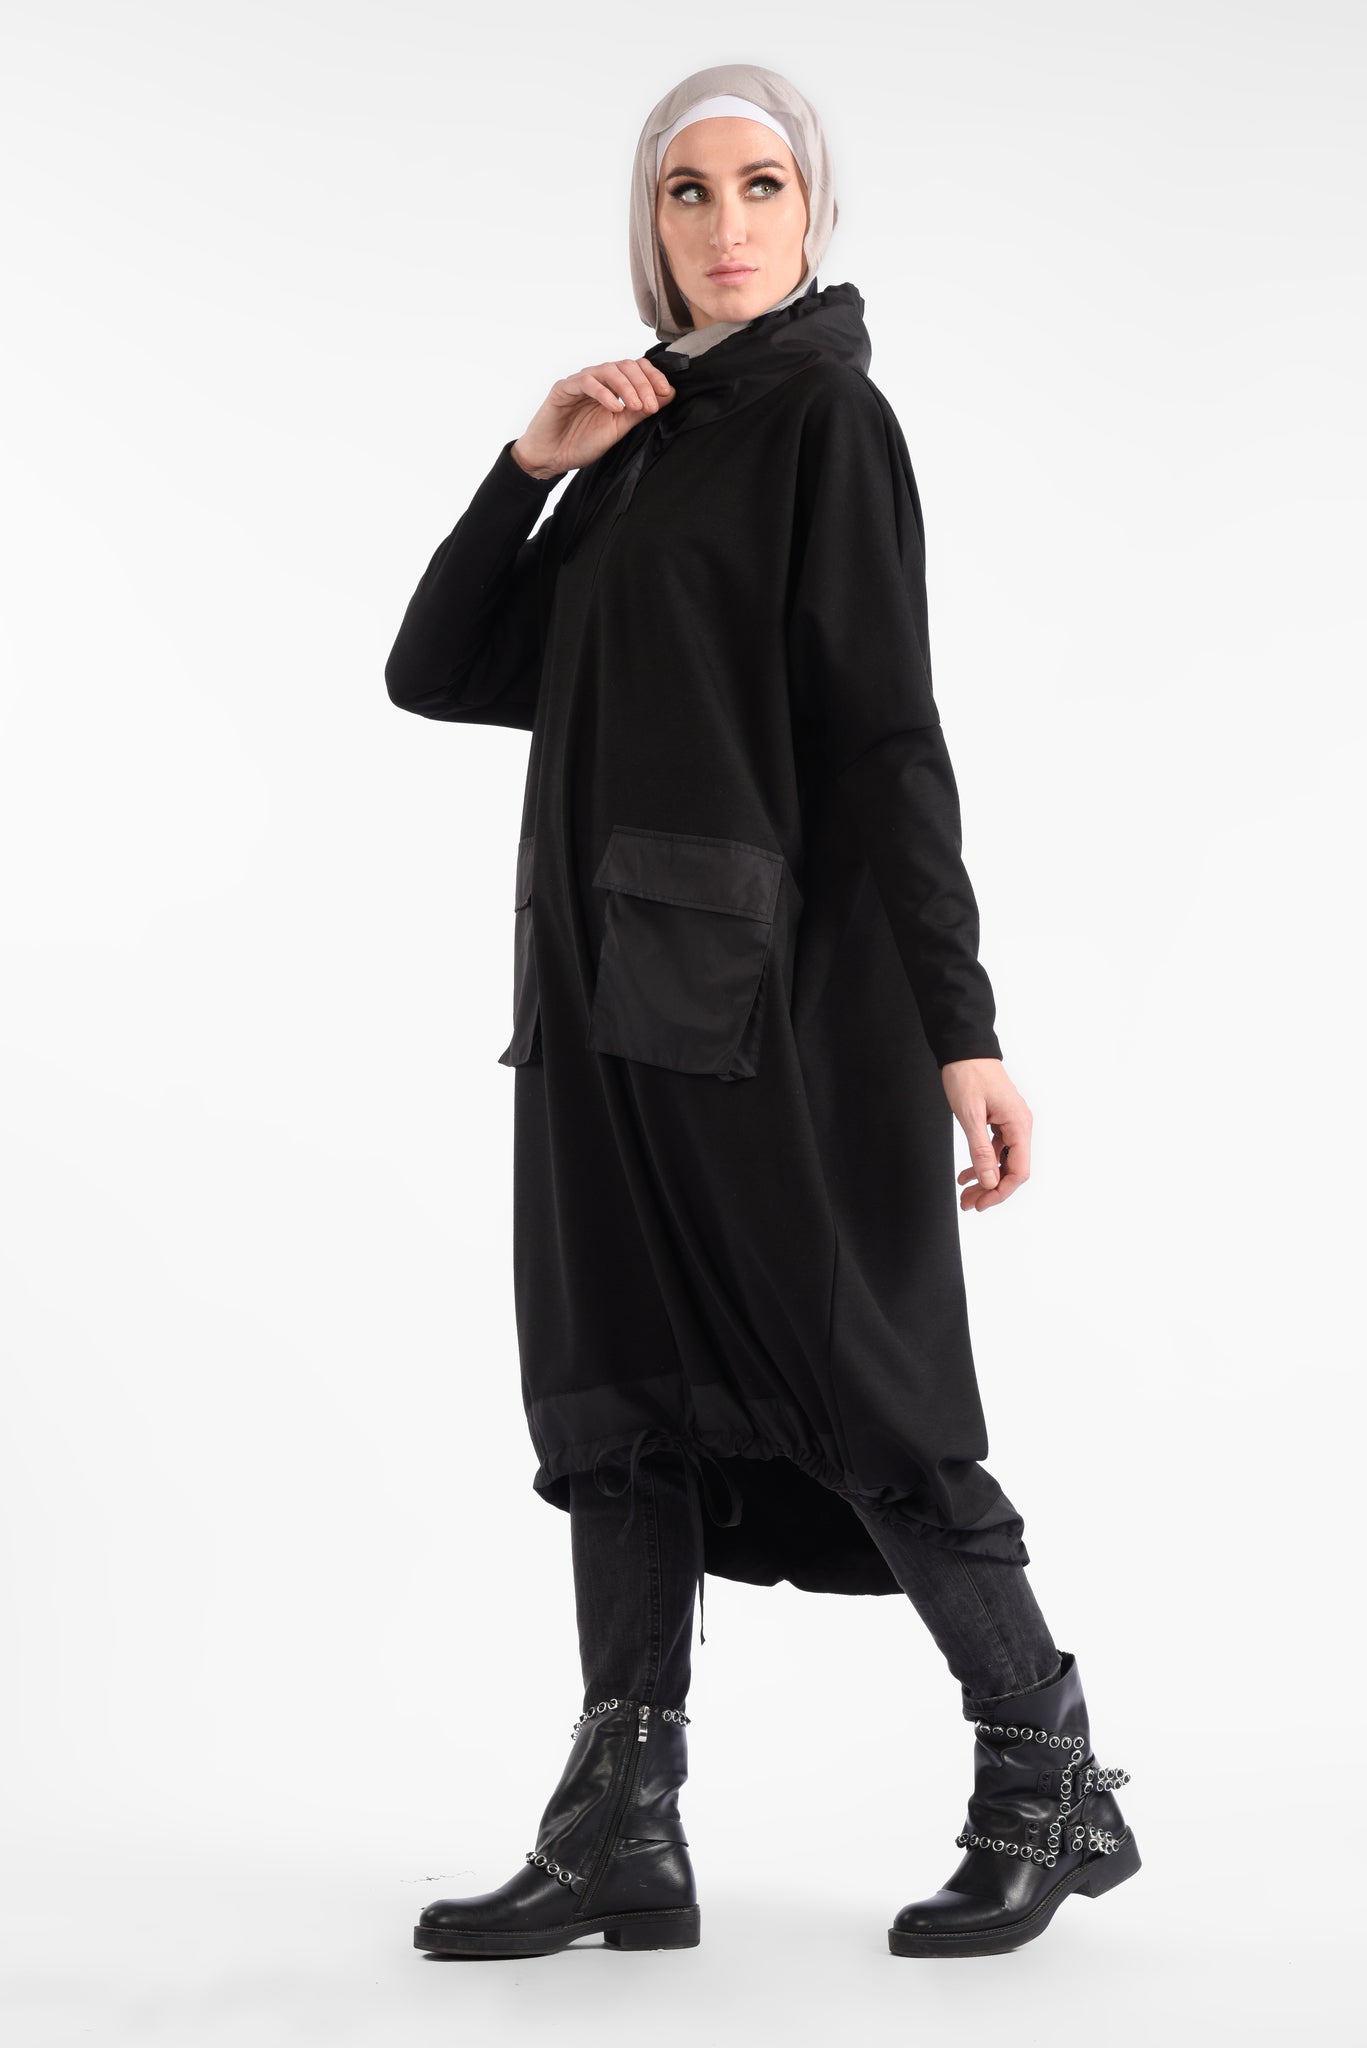 Black Midi Dress with Long Sleeves and pockets